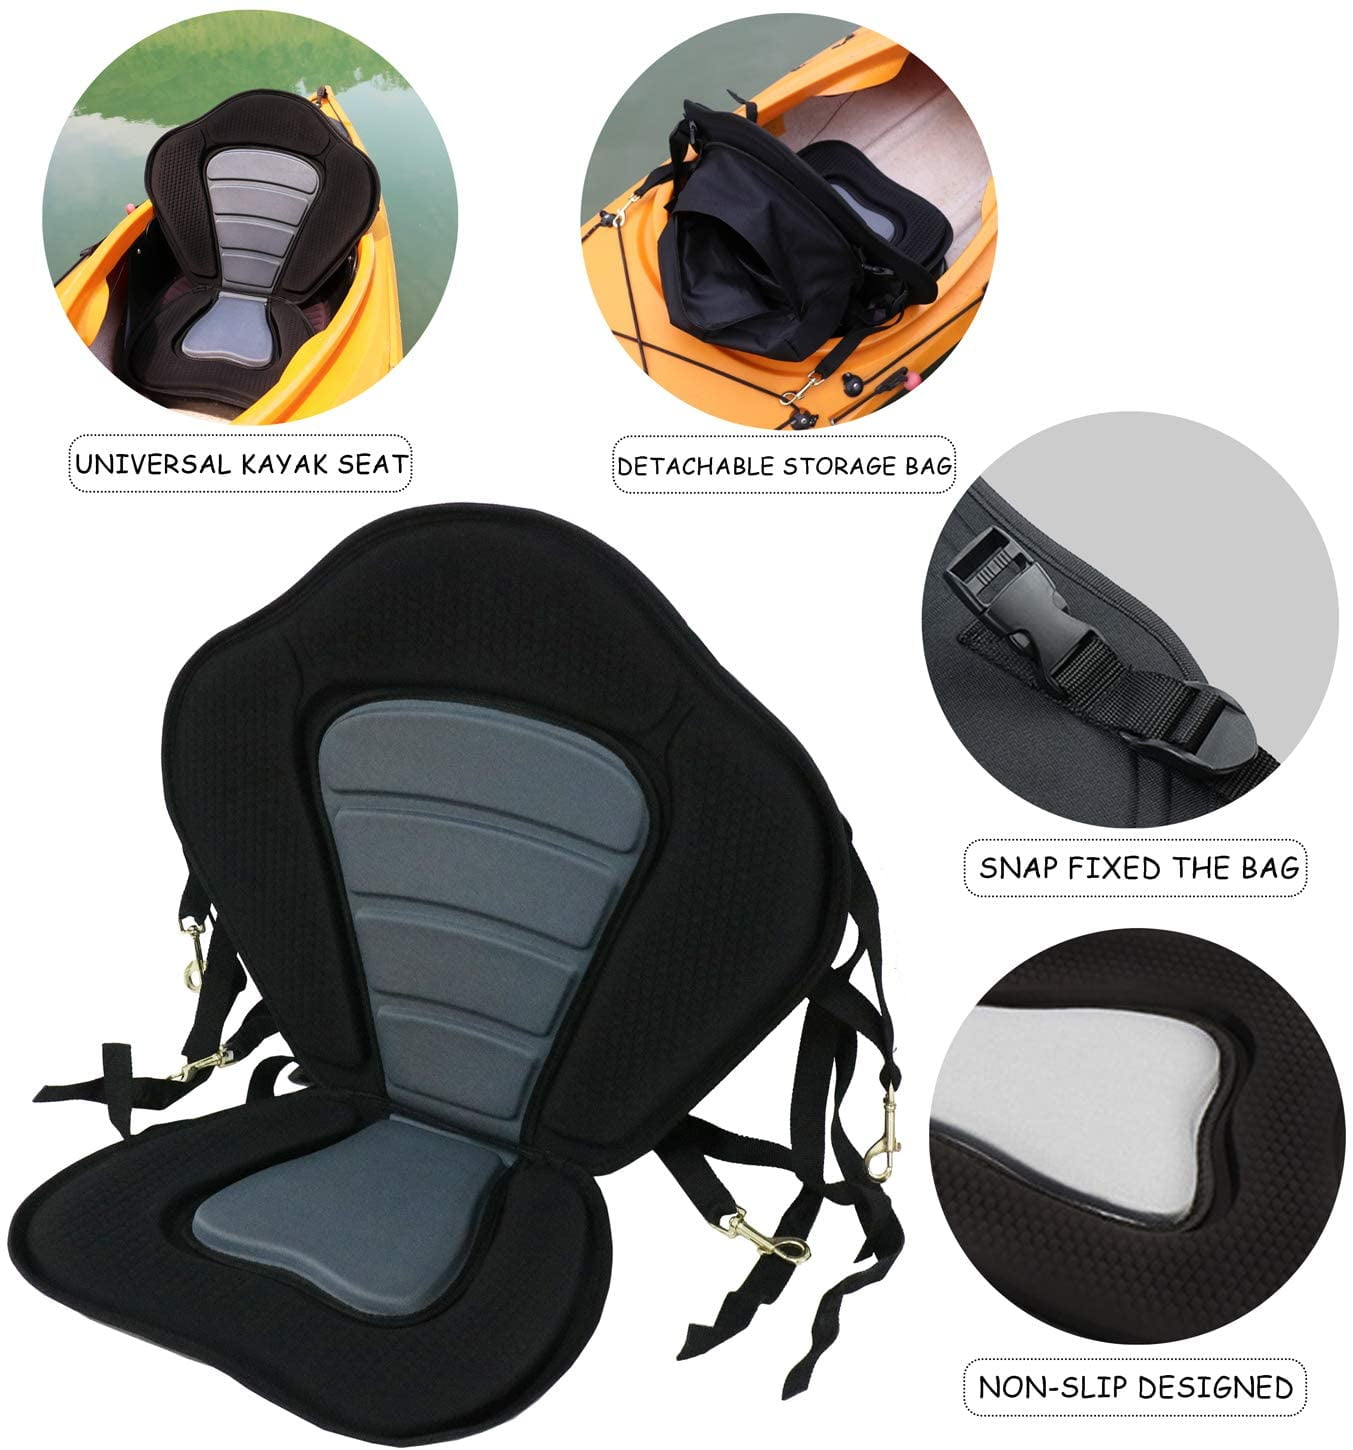 EVA Deluxe Sit-On-Top Cushion Back Support Padded Deluxe Kayak Seat 2 Styles 